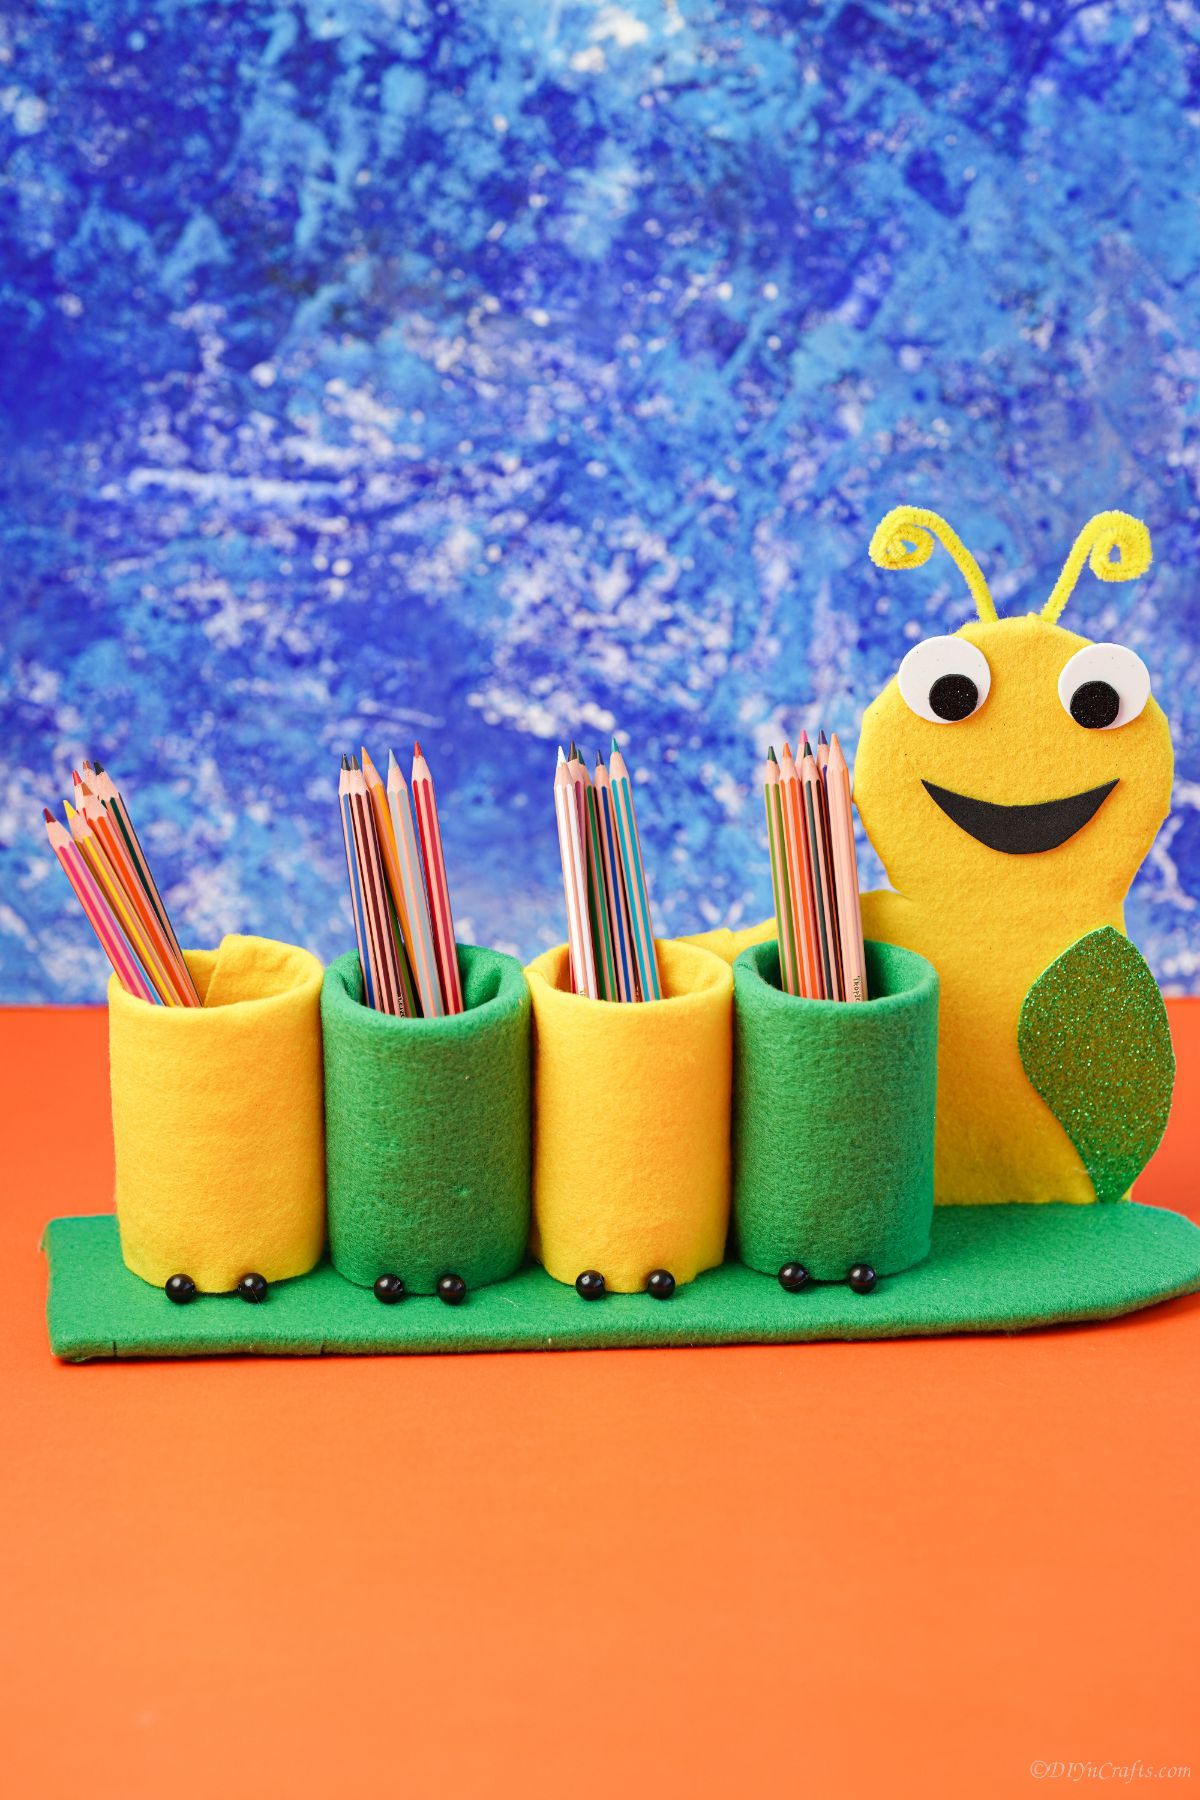 yellow and green caterpillar pencil holder in front of blue background on orange table